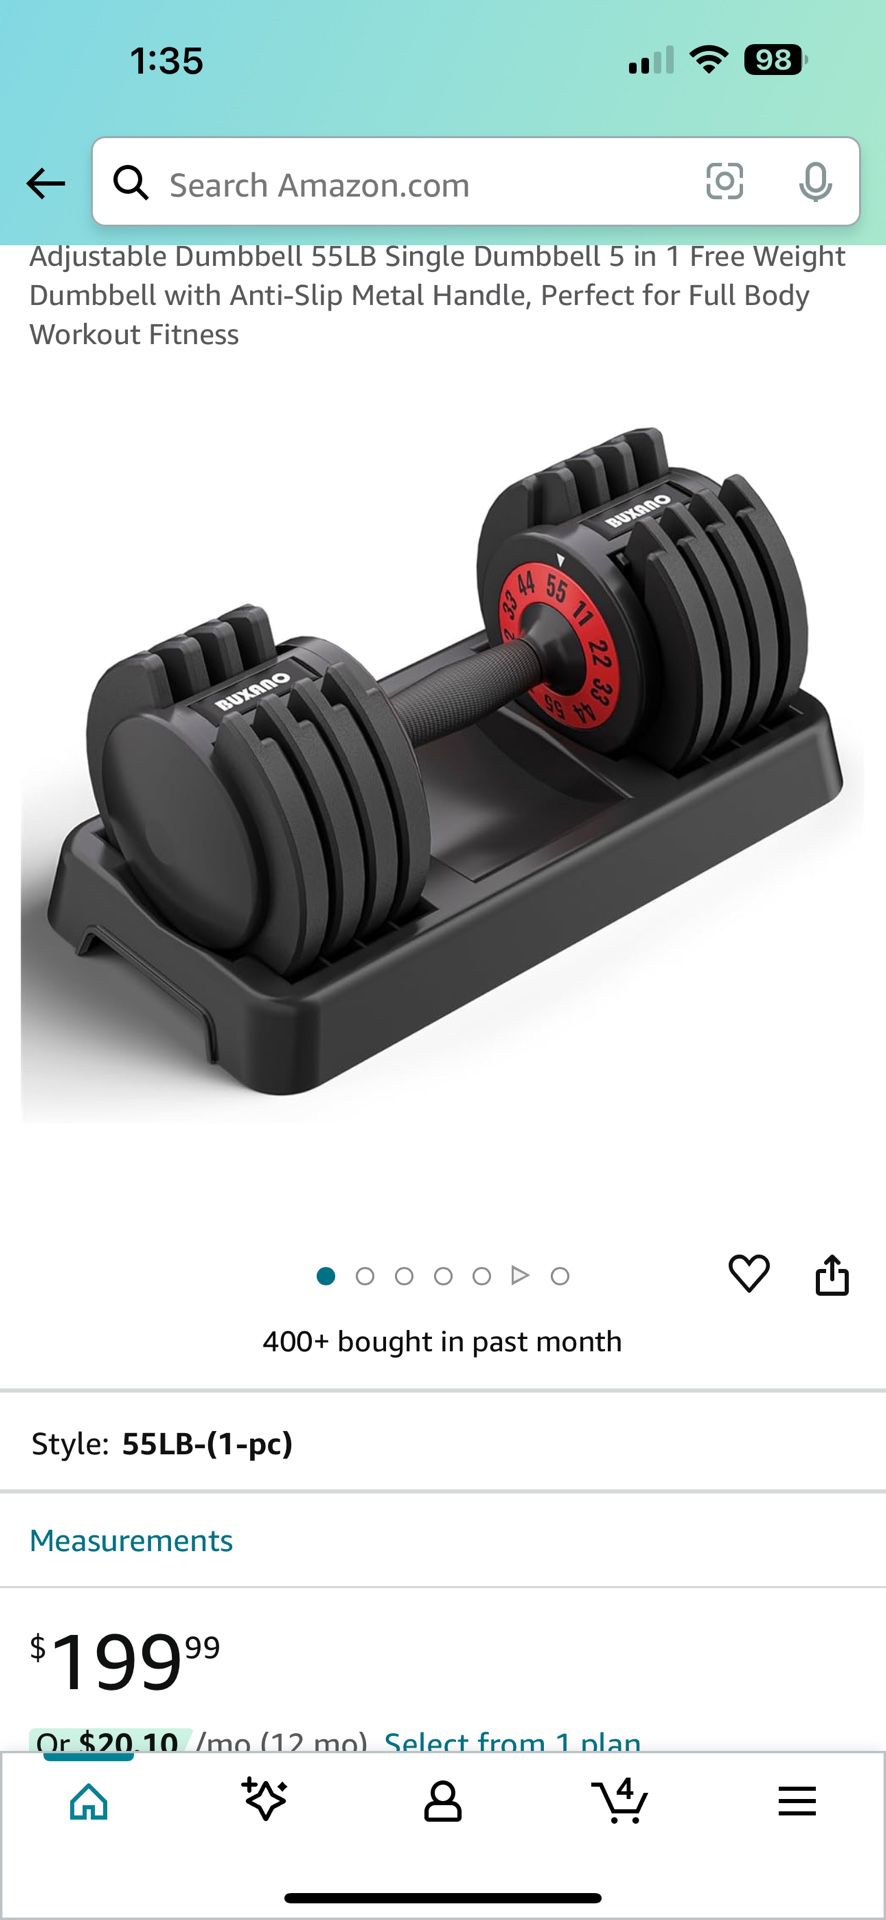 Single Adjustable Dumbbell With Anti Slip Metal Handle Perfect For Home Workout, Brand New In Box 